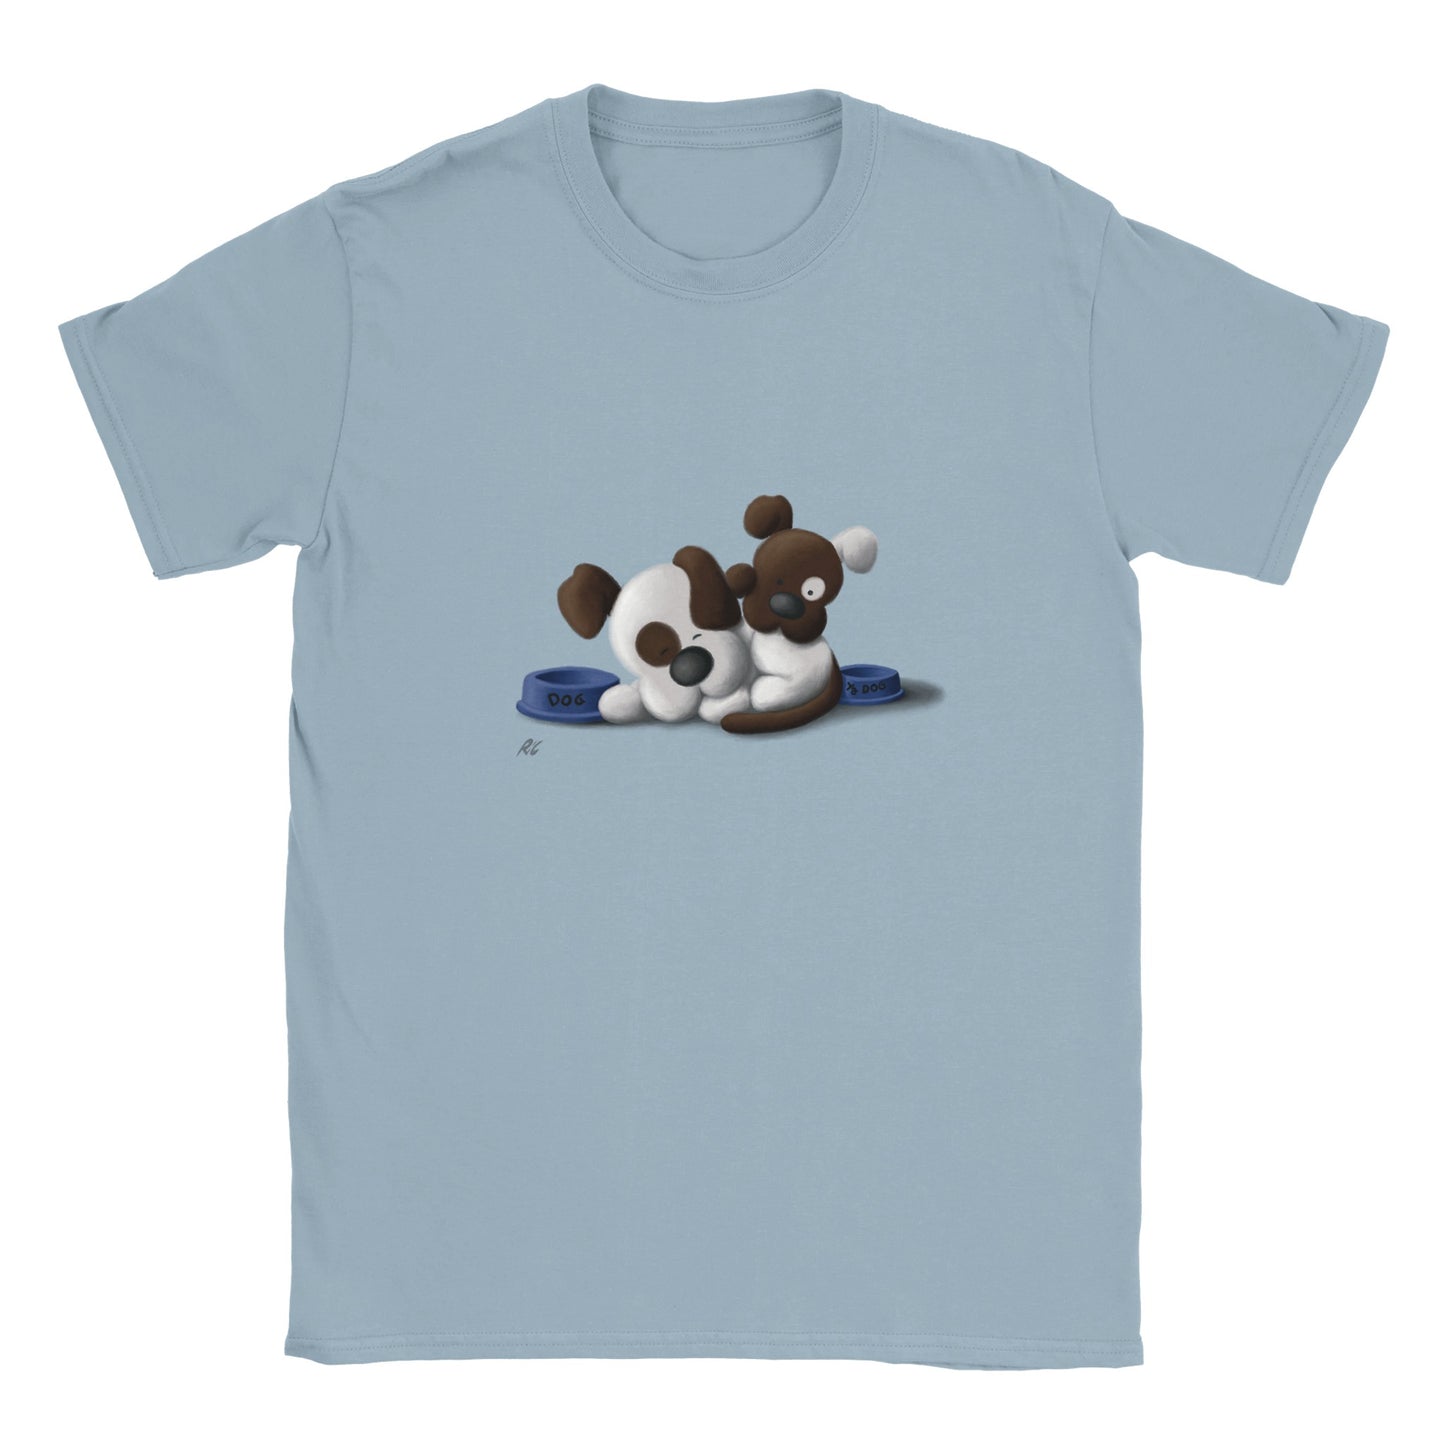 "Wake up Dad, it's time for Dinner!" - Classic Kids Crewneck T-shirt